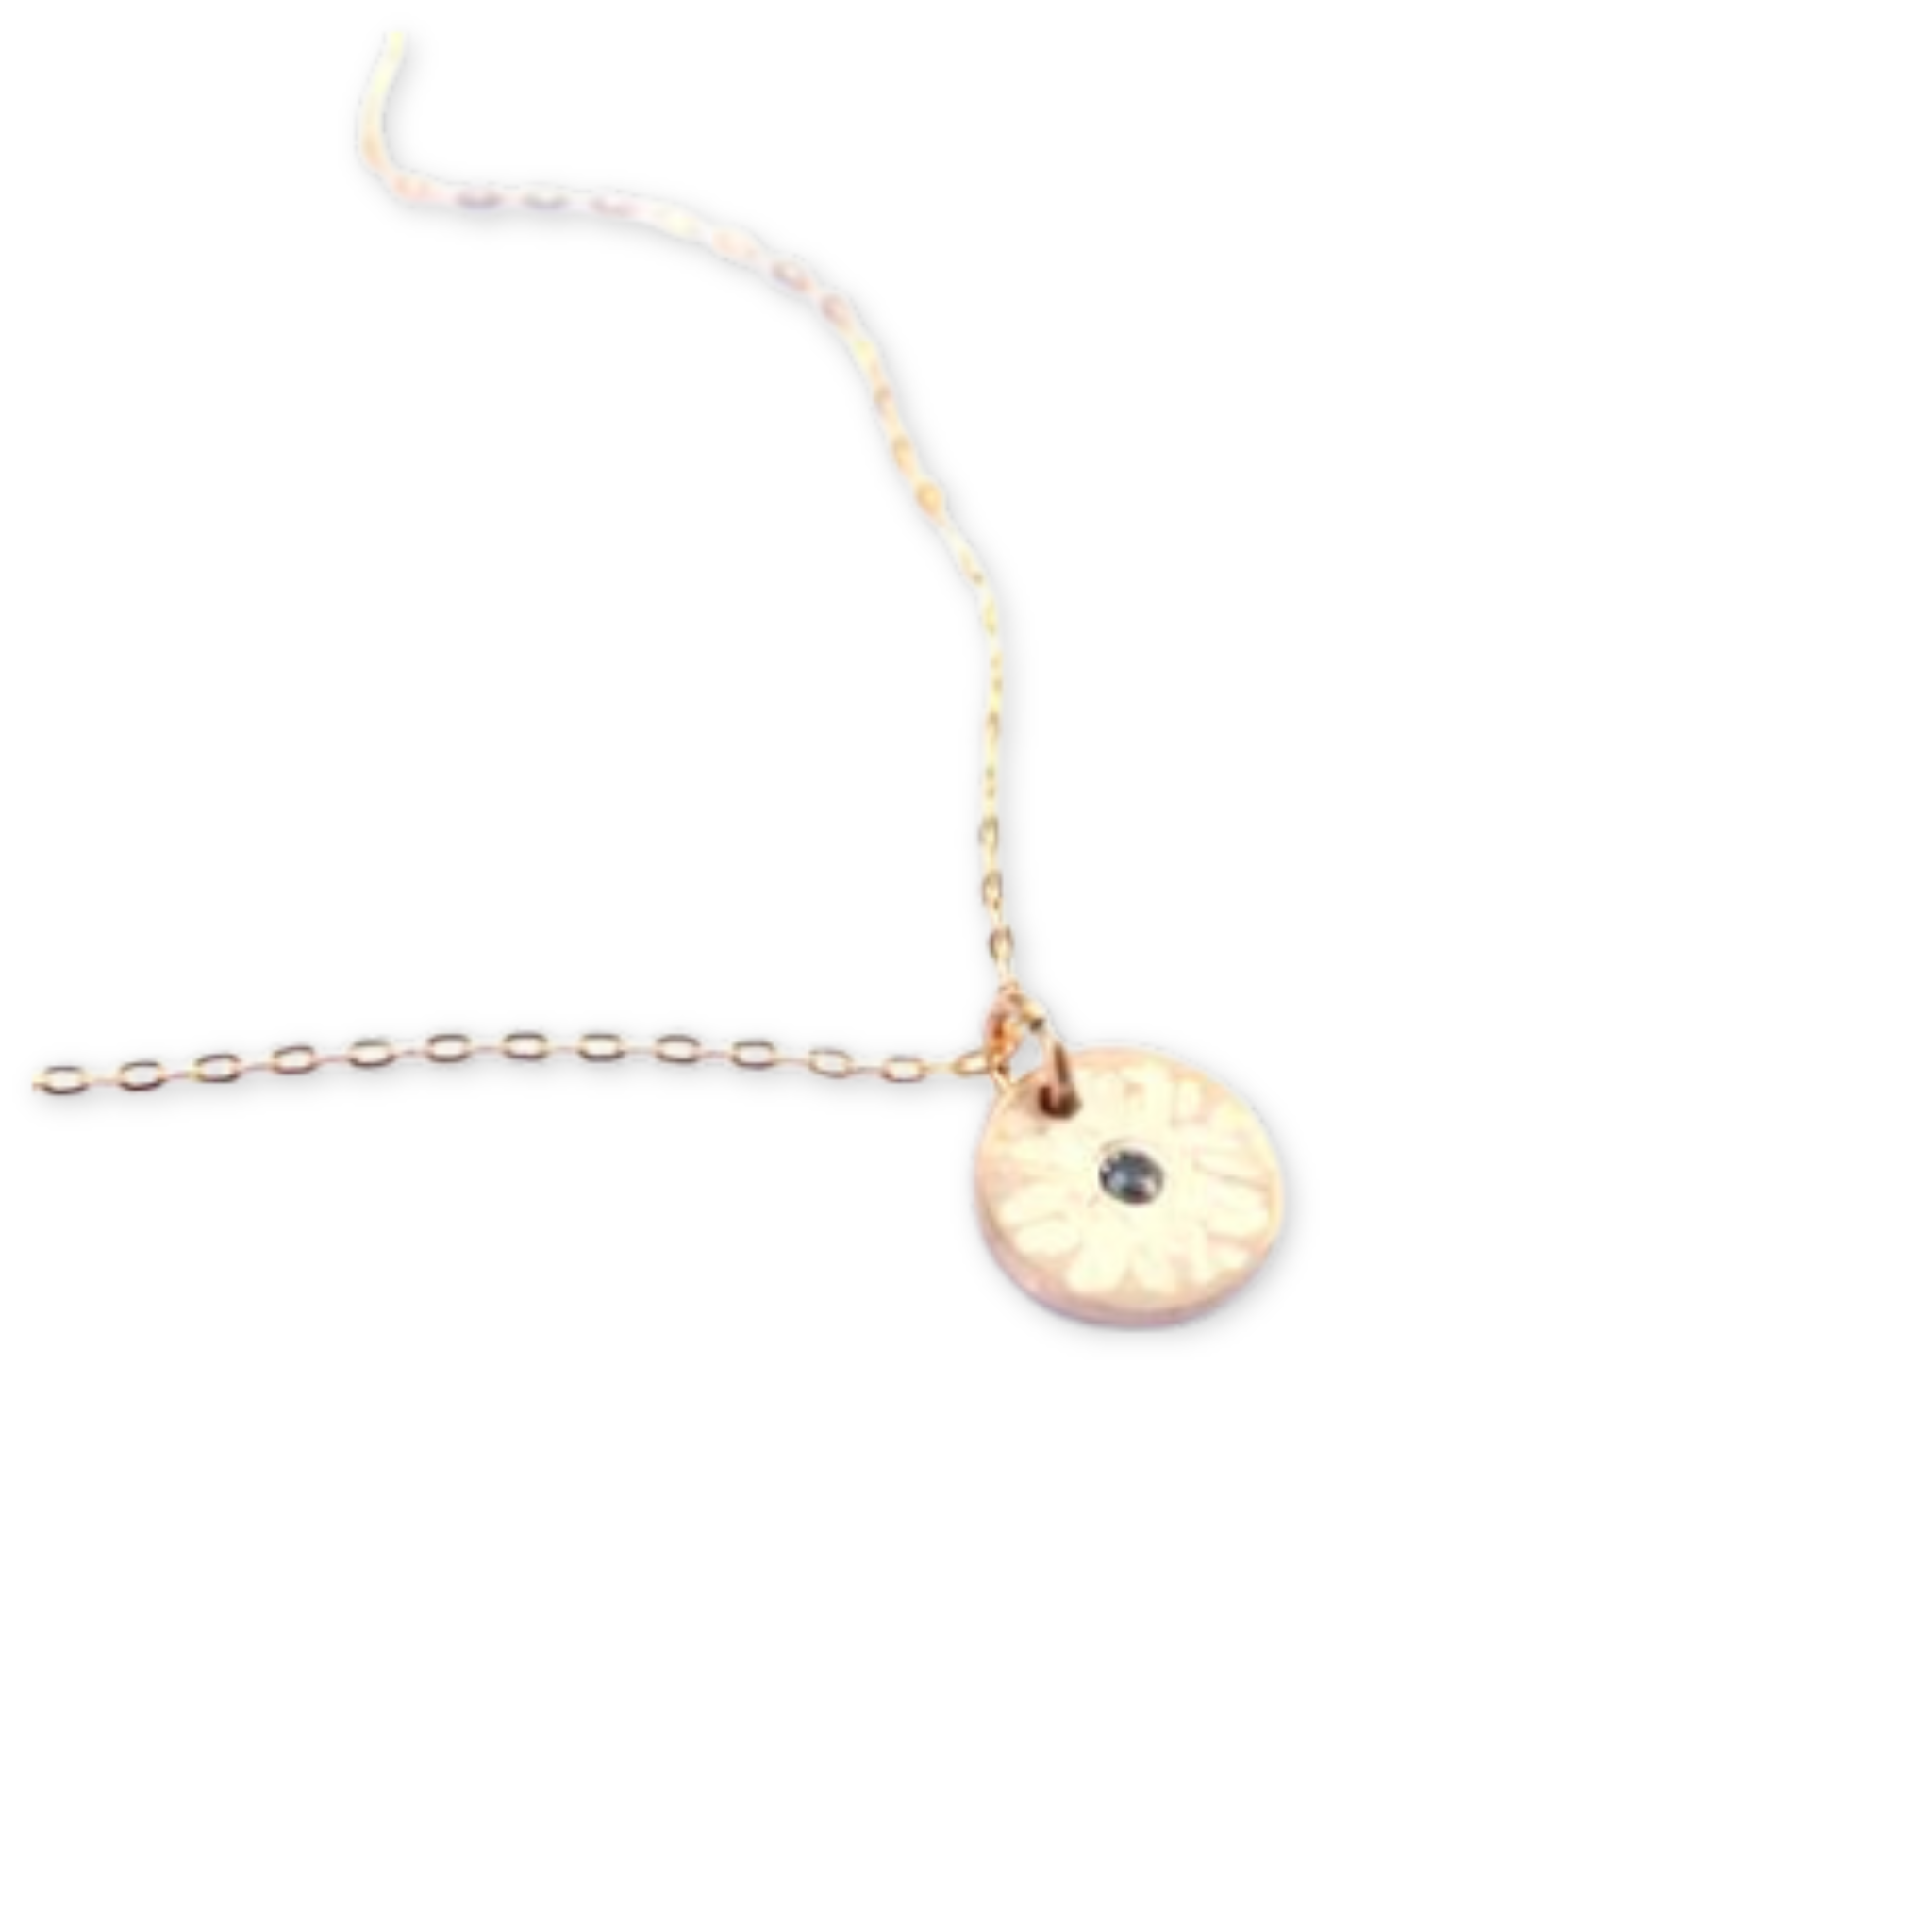 necklace with a round disc and birthstone